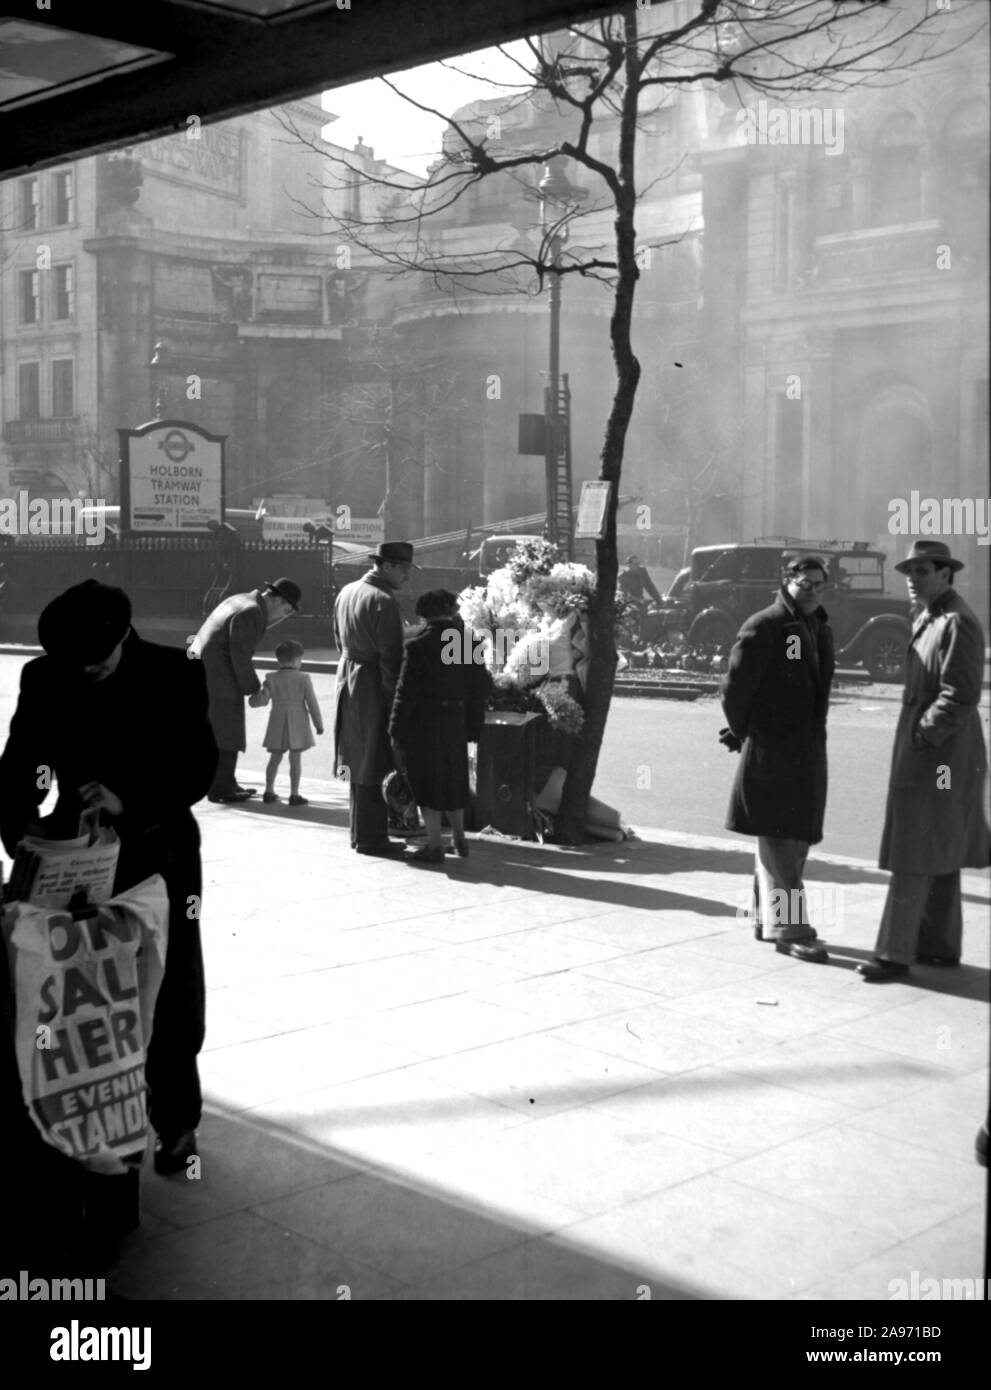 A newspaper seller and flower seller working the street at Holborn Station in London in 1952. An everyday life 1950s street scene with veteran cars in the background. Stock Photo